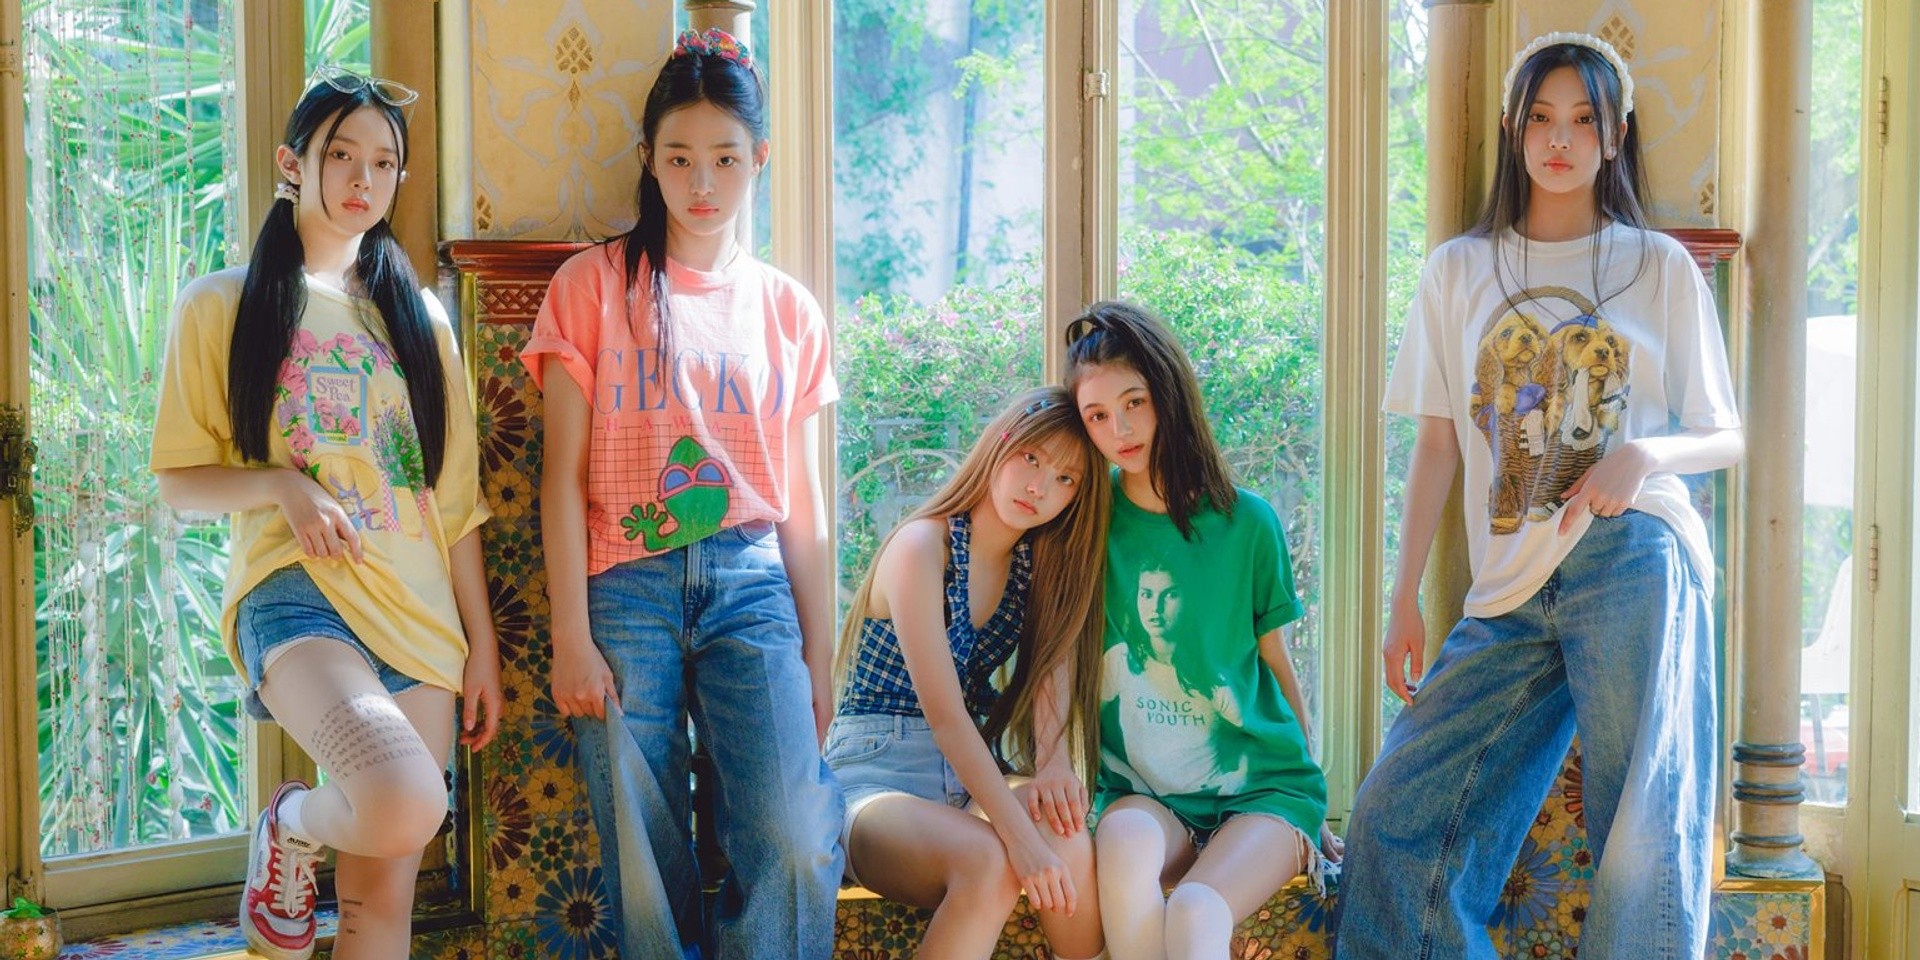 ADOR unveils new girl group NewJeans, drop debut single 'Attention' — watch